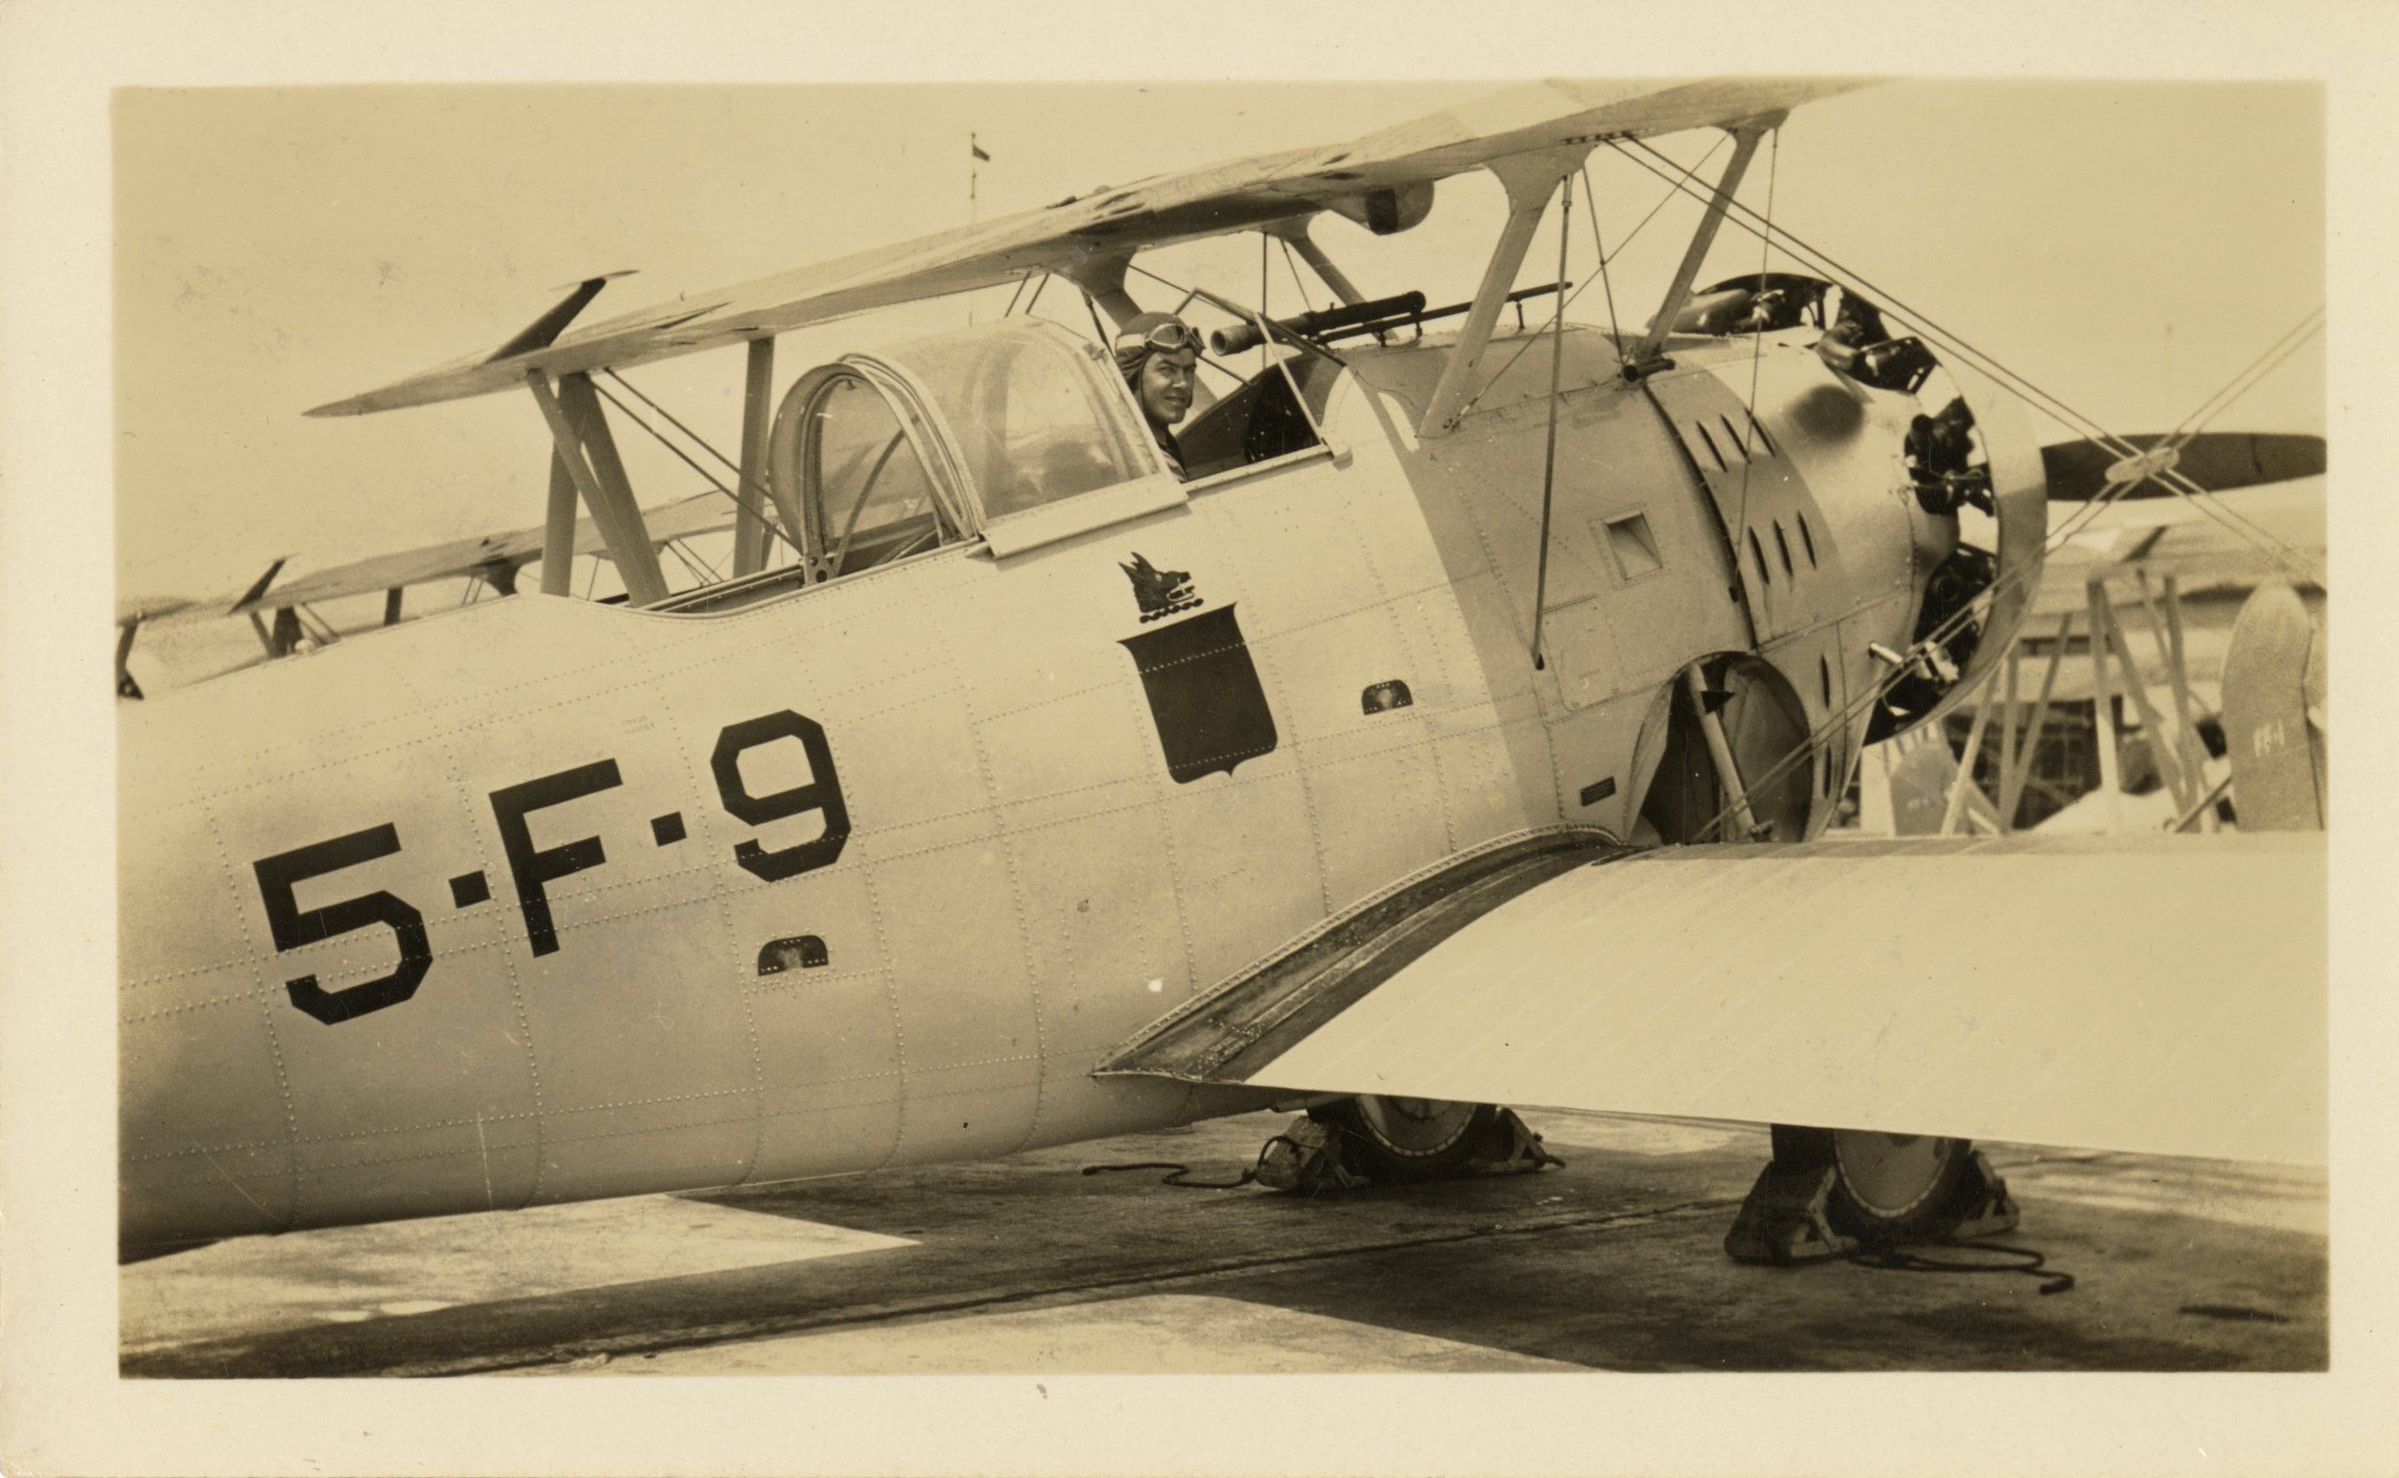 Primary Image of James H. Flatley Jr. in the Cockpit of a Grumman FF-1 Biplane